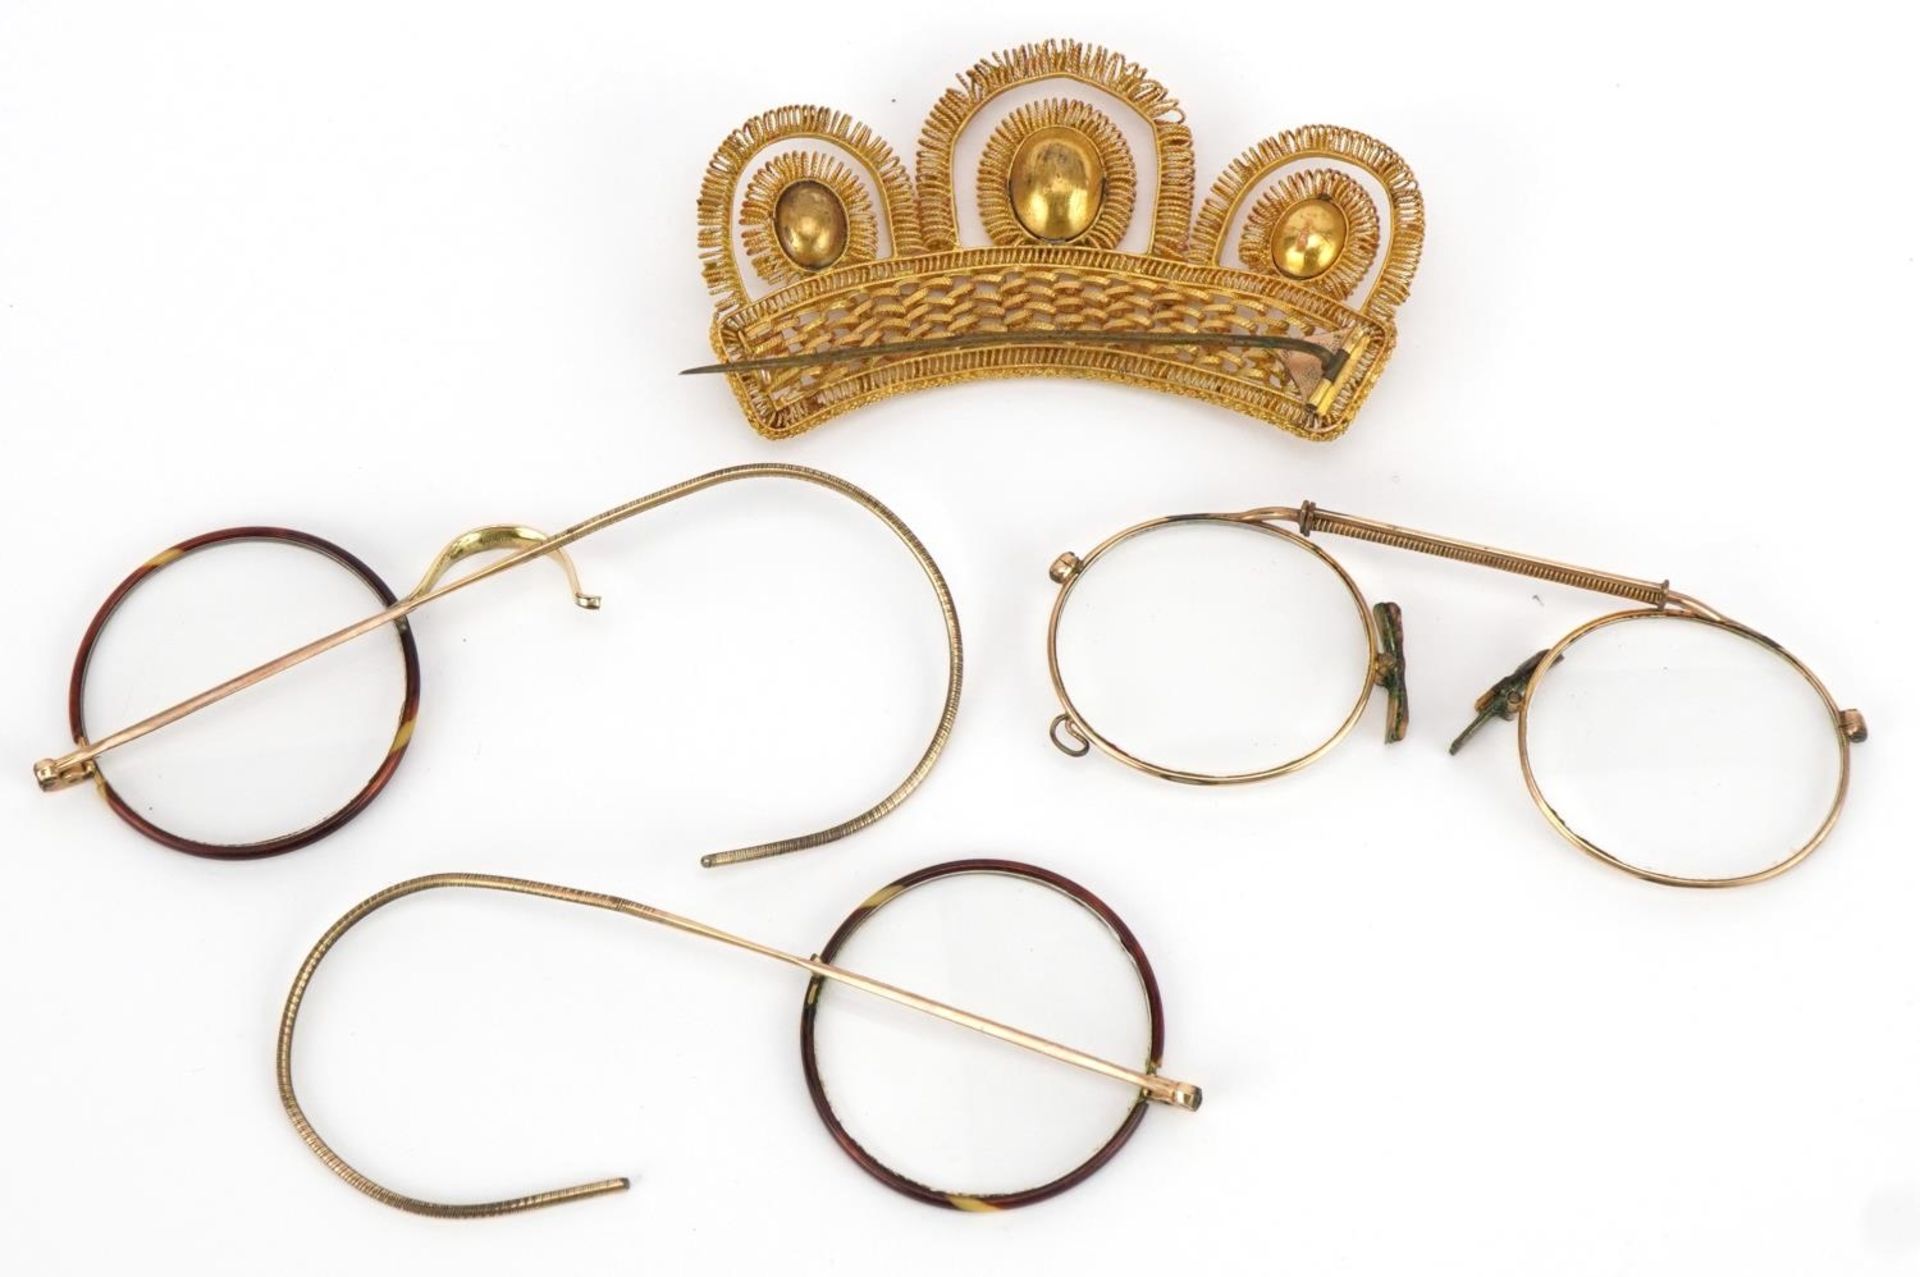 Two pairs of antique yellow metal spectacles and a yellow metal crown brooch set with orange stones, - Image 2 of 3